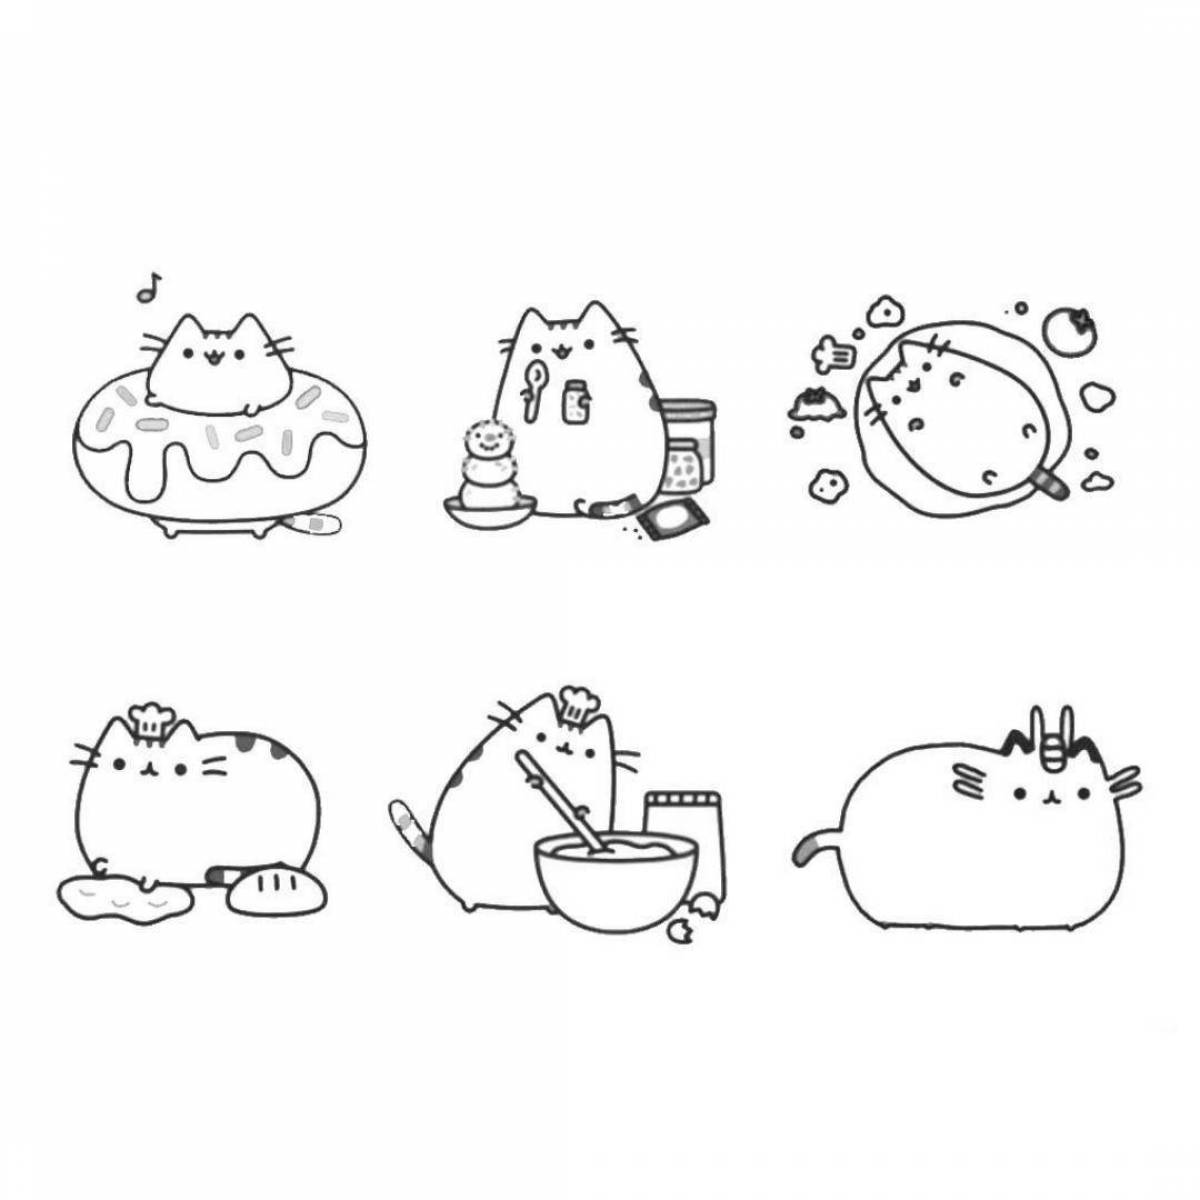 Adorable pusheen coloring page